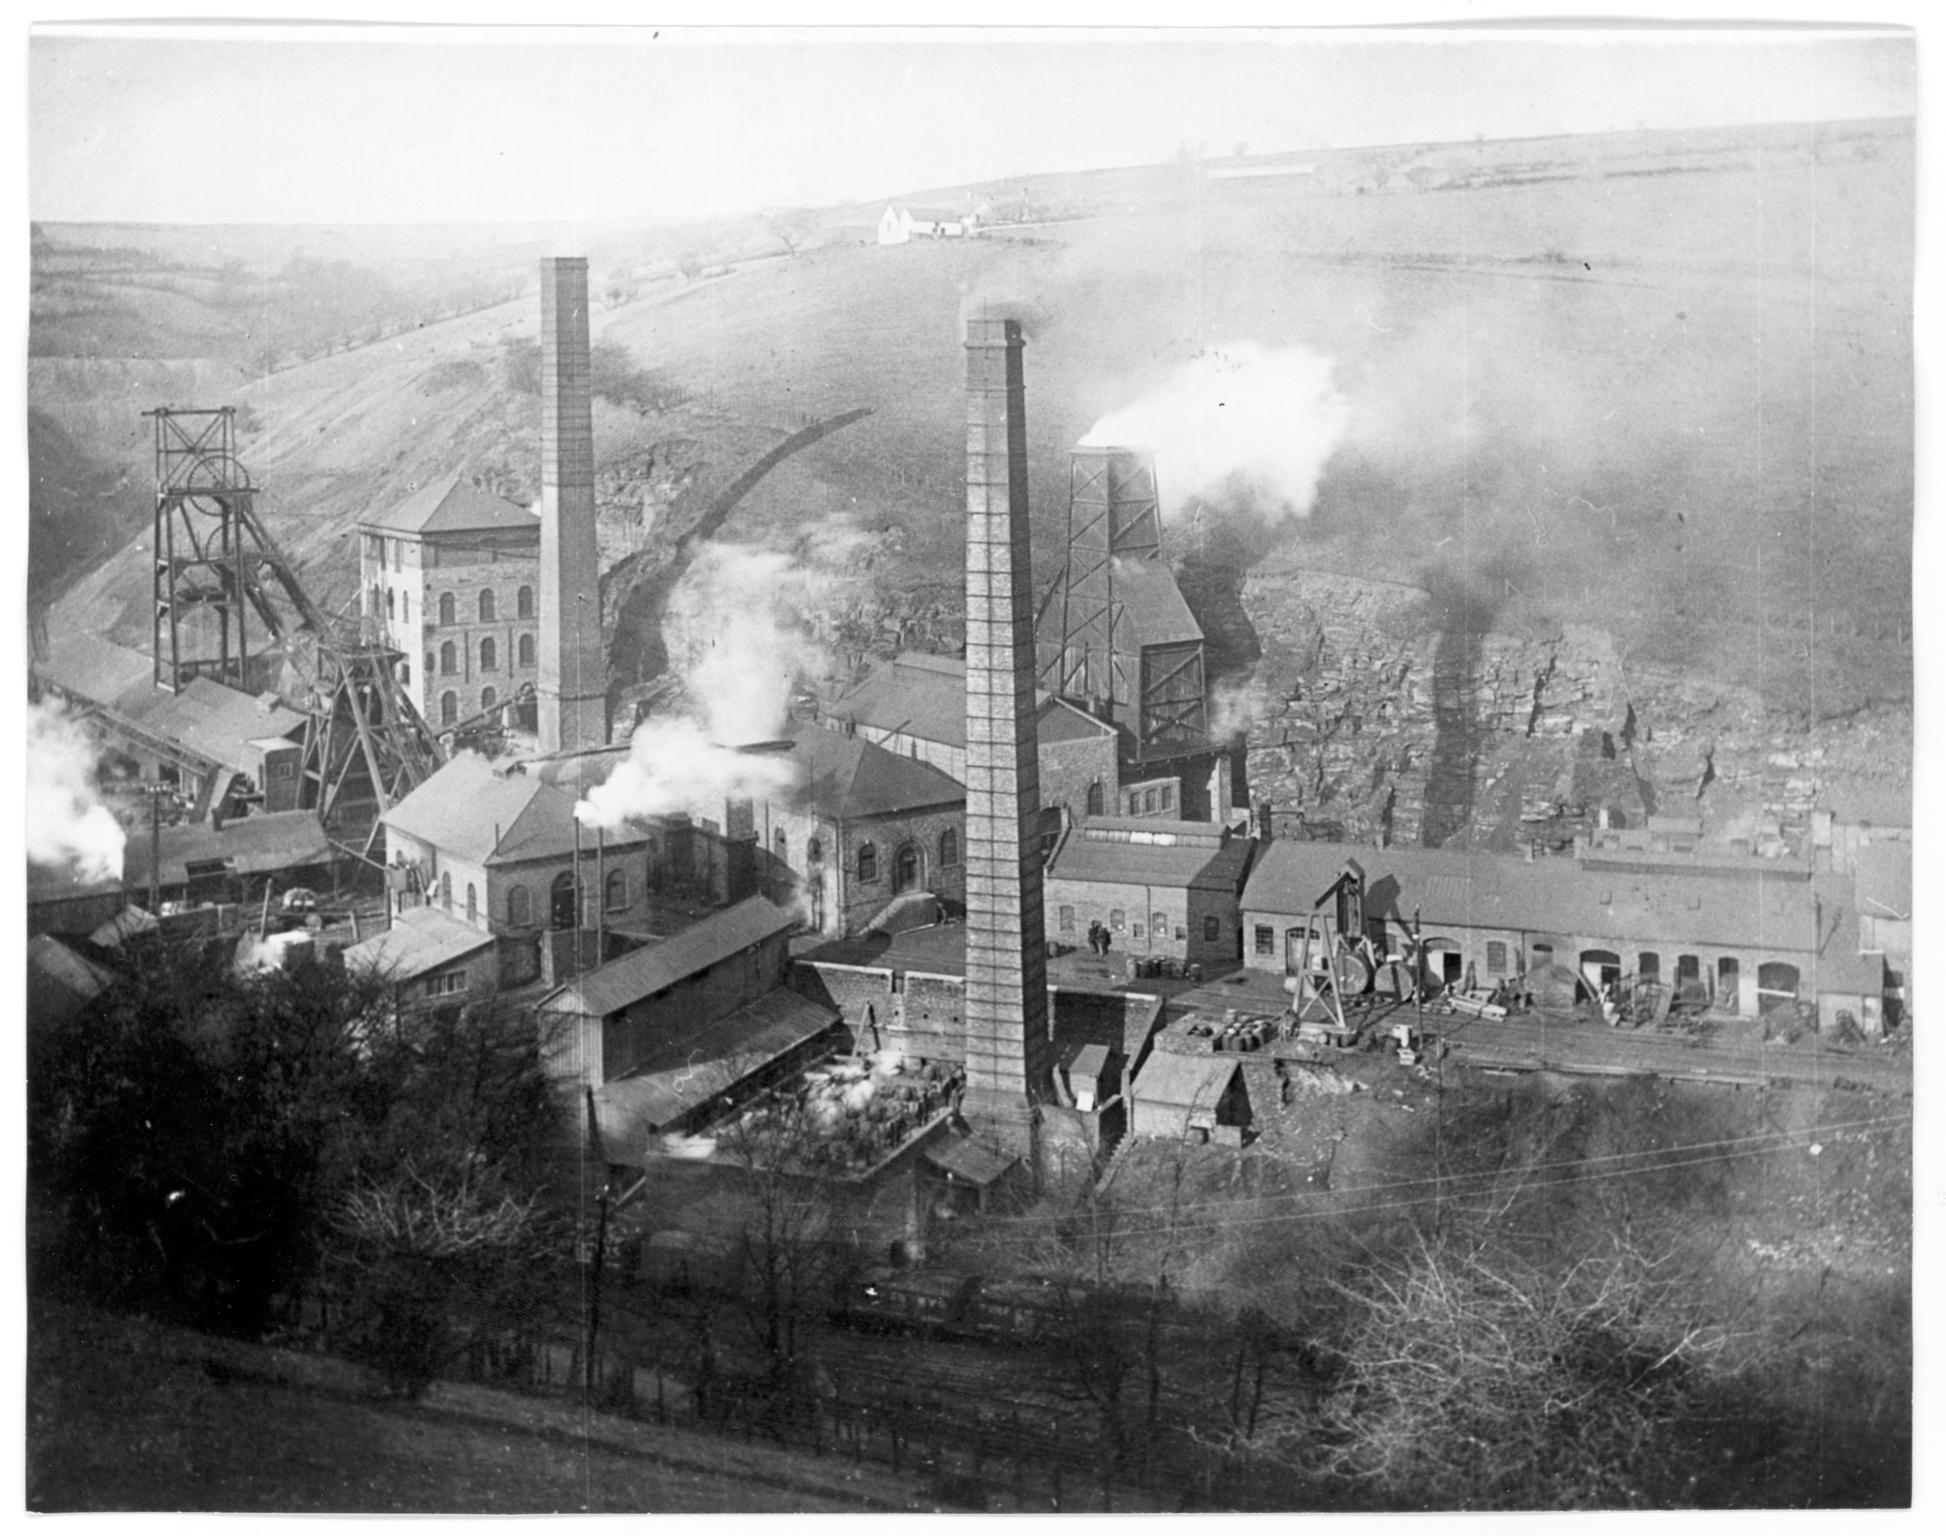 Tirpentwys Colliery, photograph